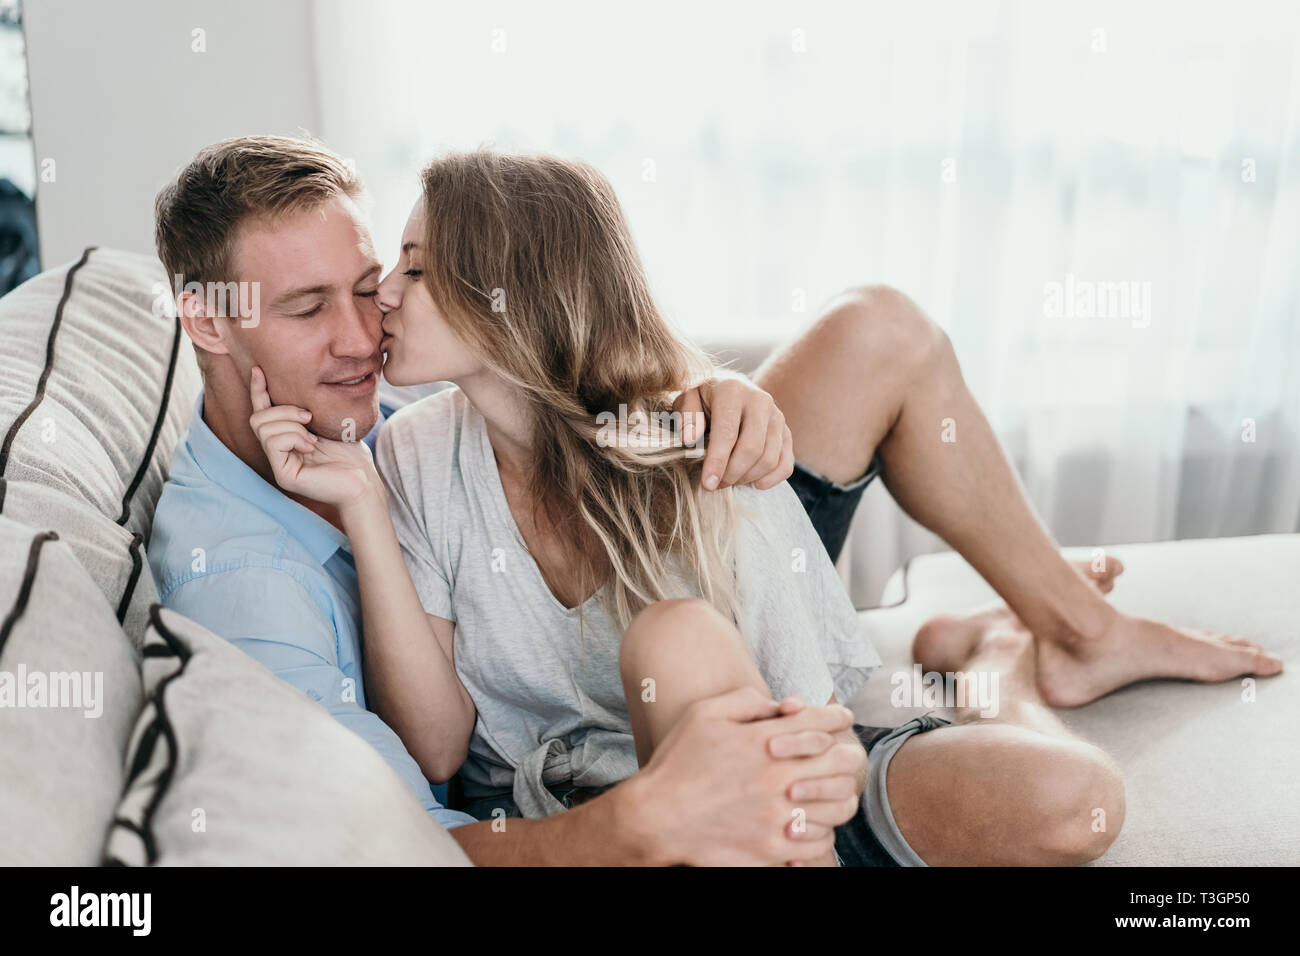 The concept of tenderness and affection Stock Photo